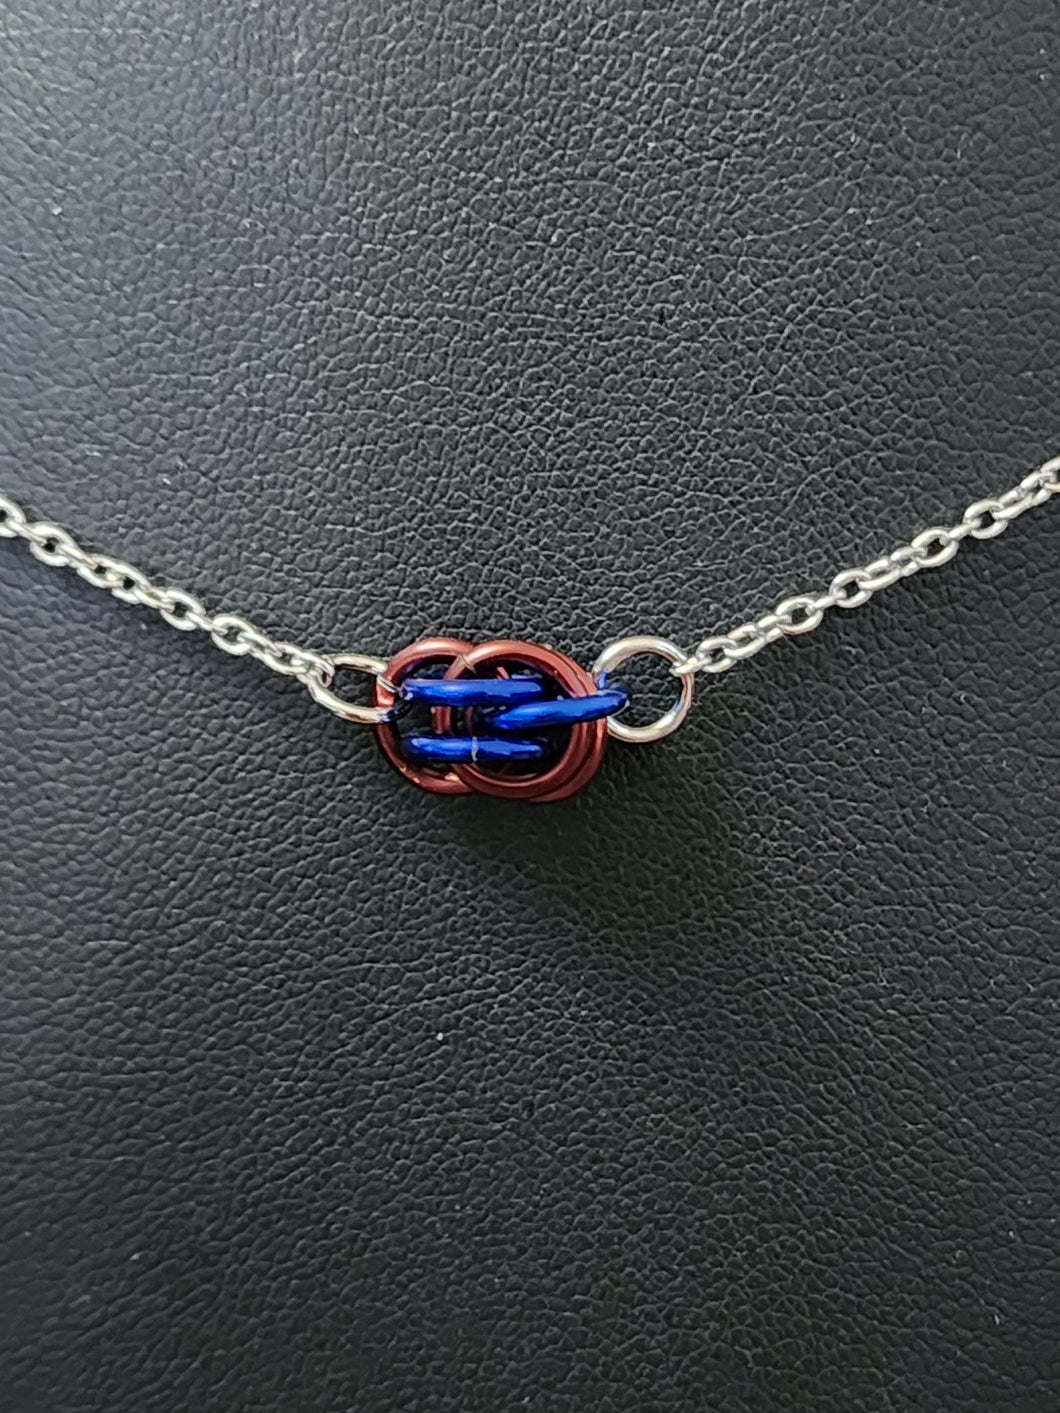 Cobalt and Henna (Blue and Brown) Chainmaille Sweet Pea Necklace